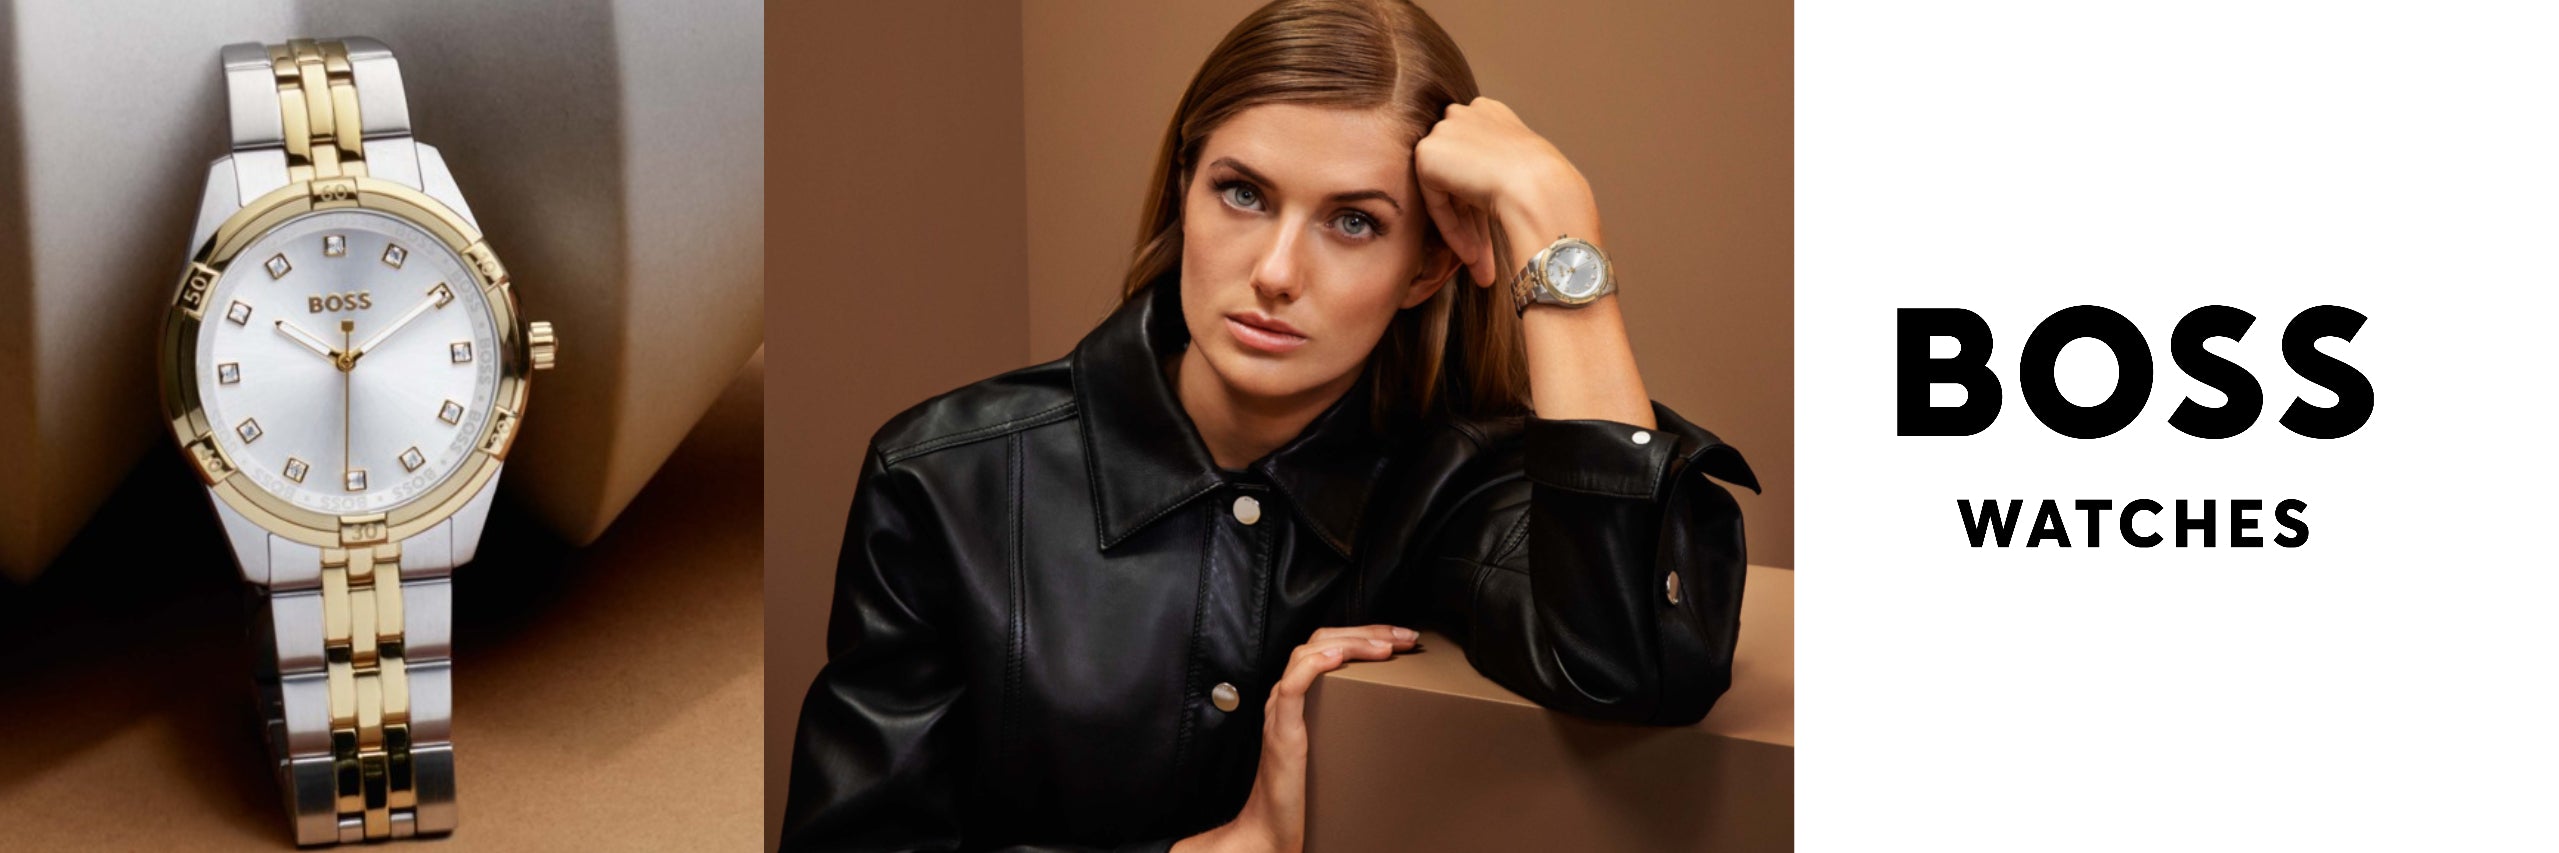 3 Women Page For Men | Watches Now Online HUGO Shop And – BOSS